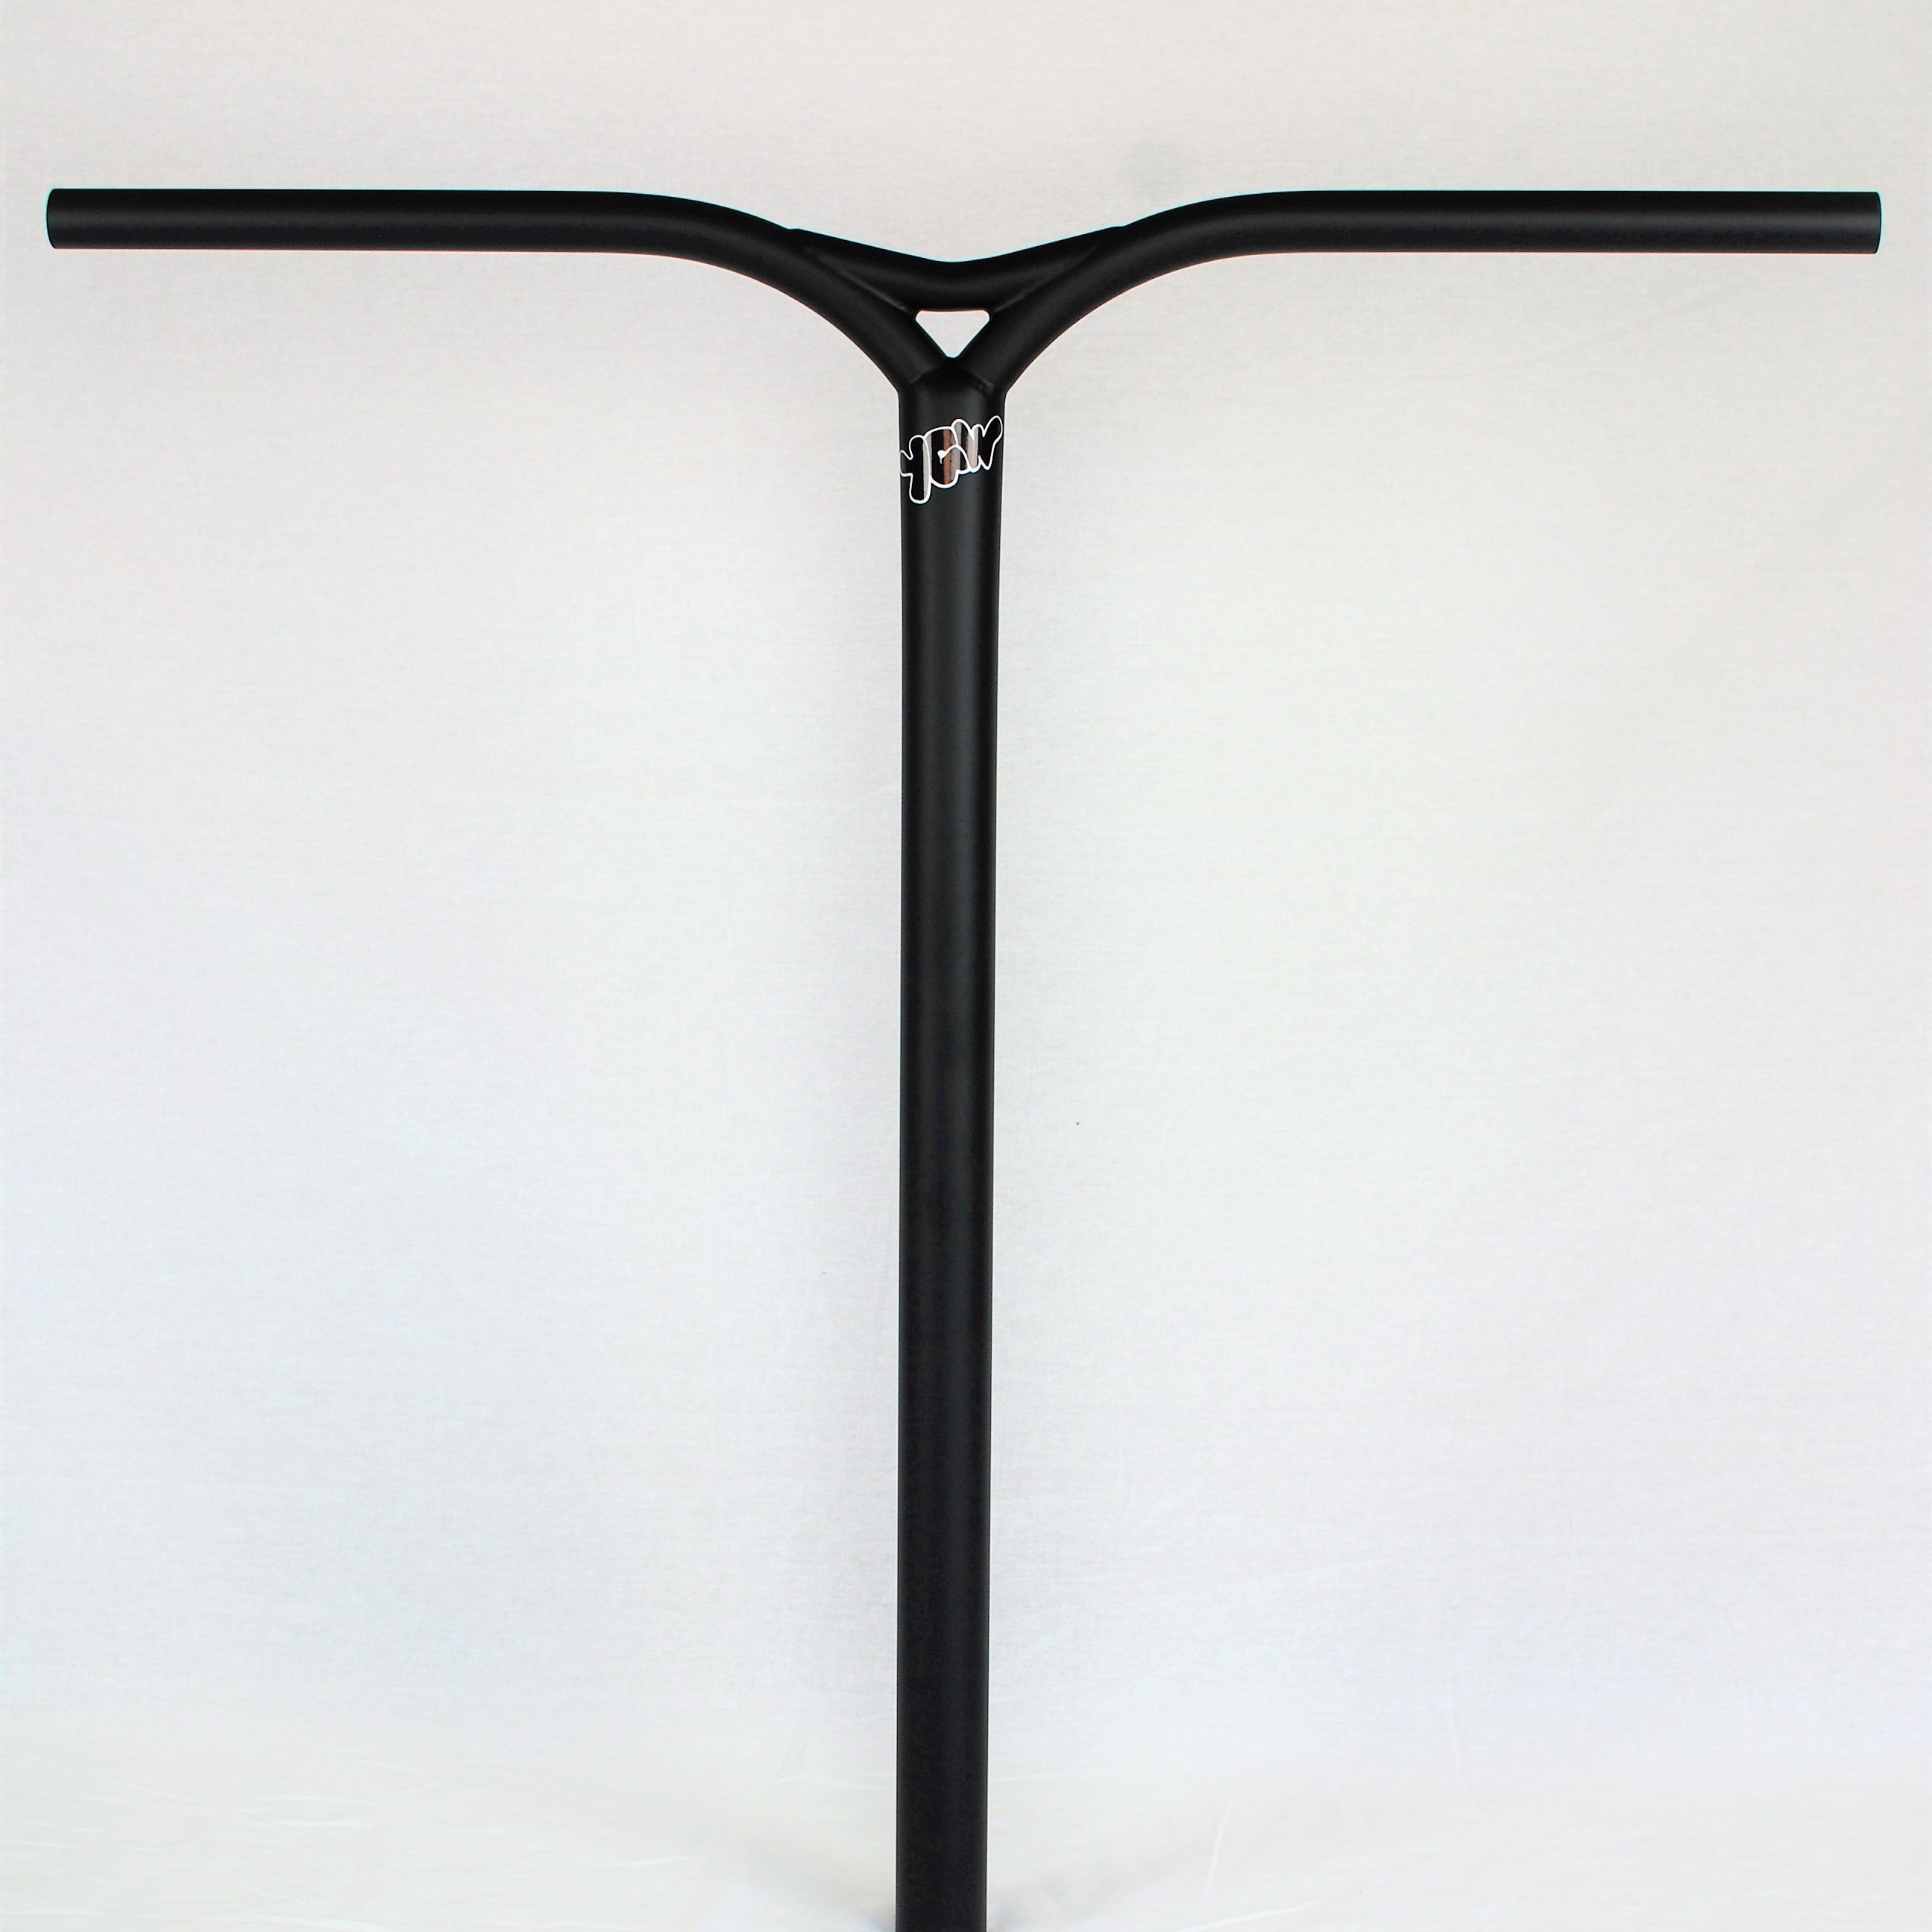 YWG Millennium Oversized, Scooter Bars, Flat Black